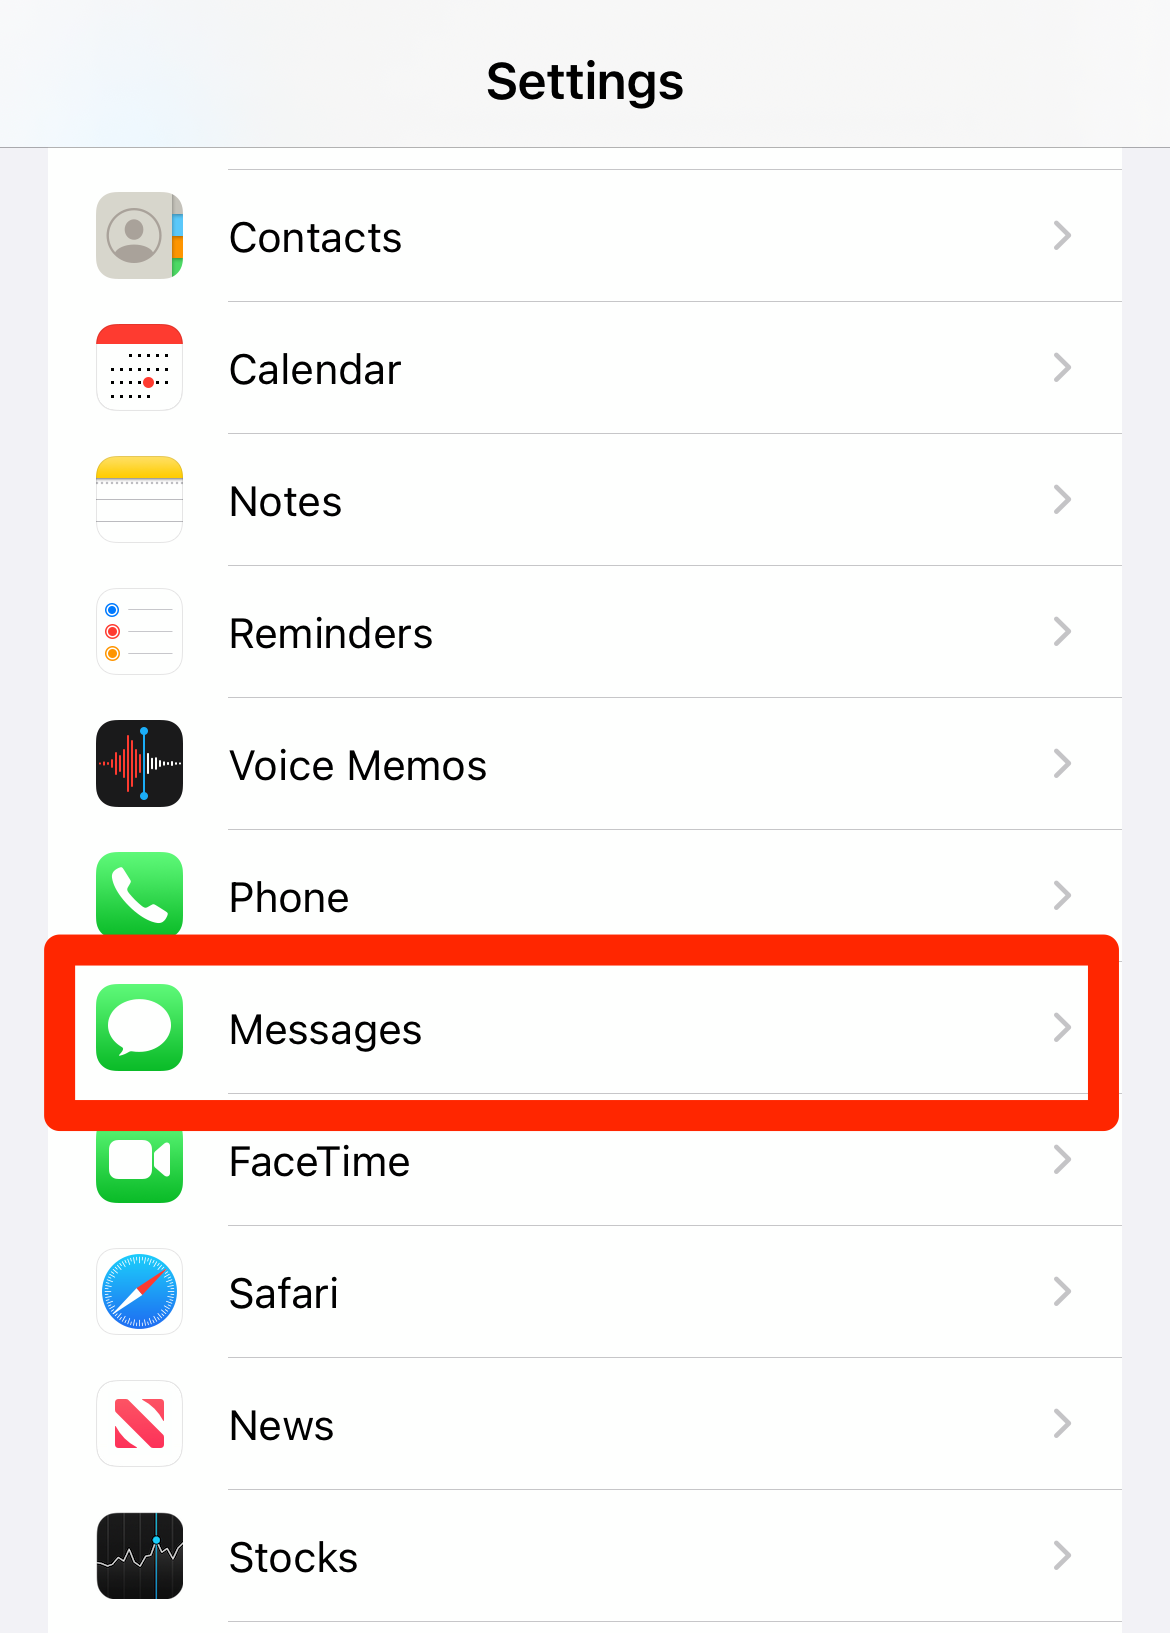 iPhone screen showing Messages app in the settings